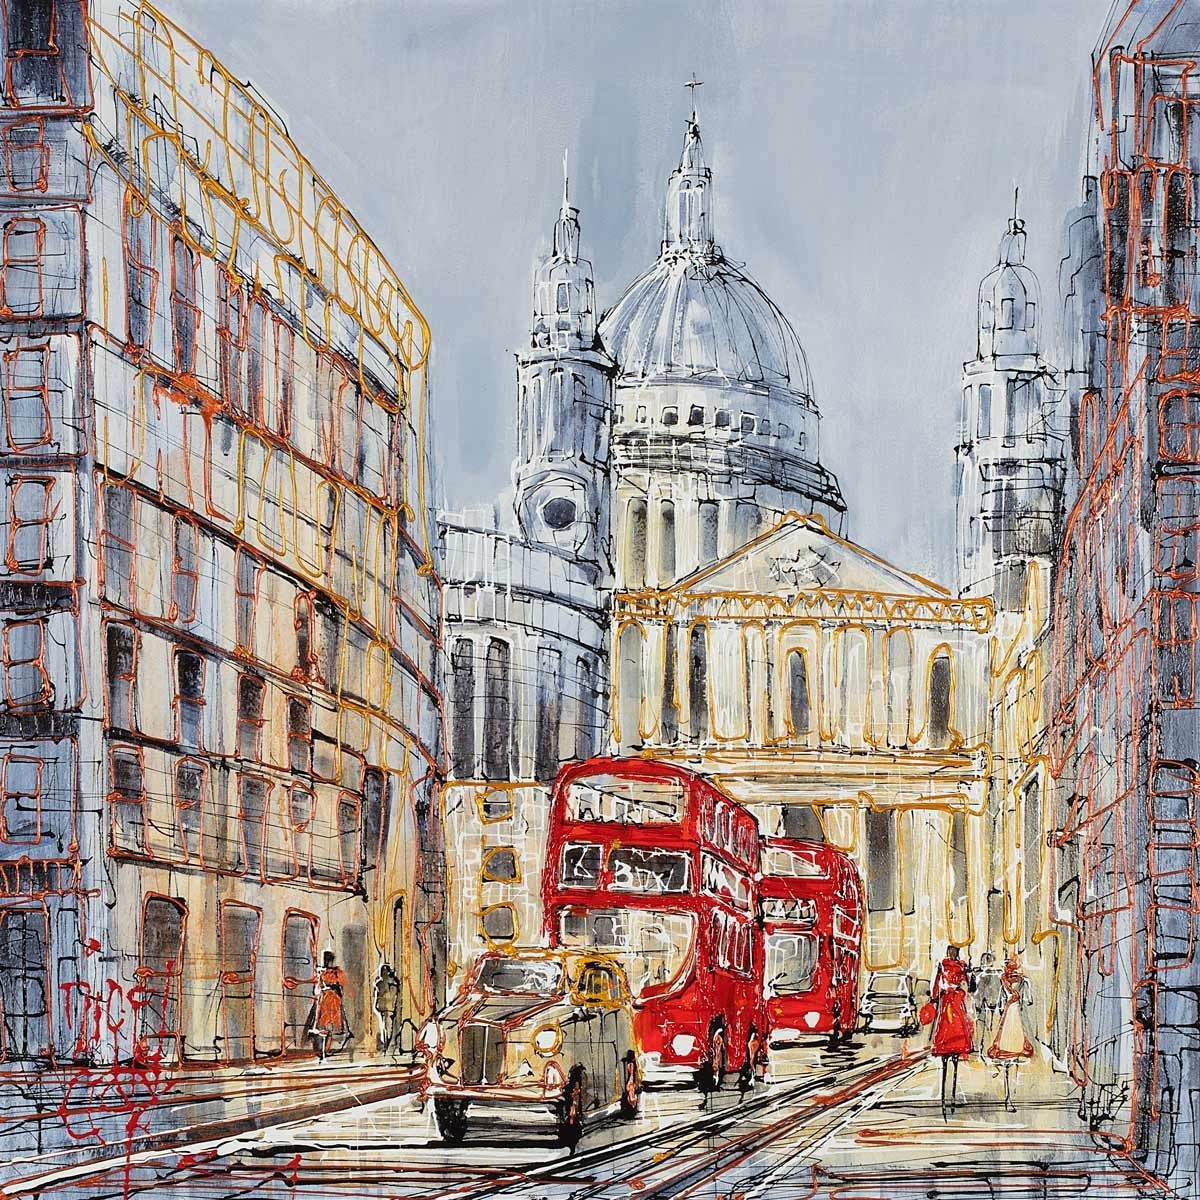 Ludgate Circus - SOLD OUT Nigel Cooke